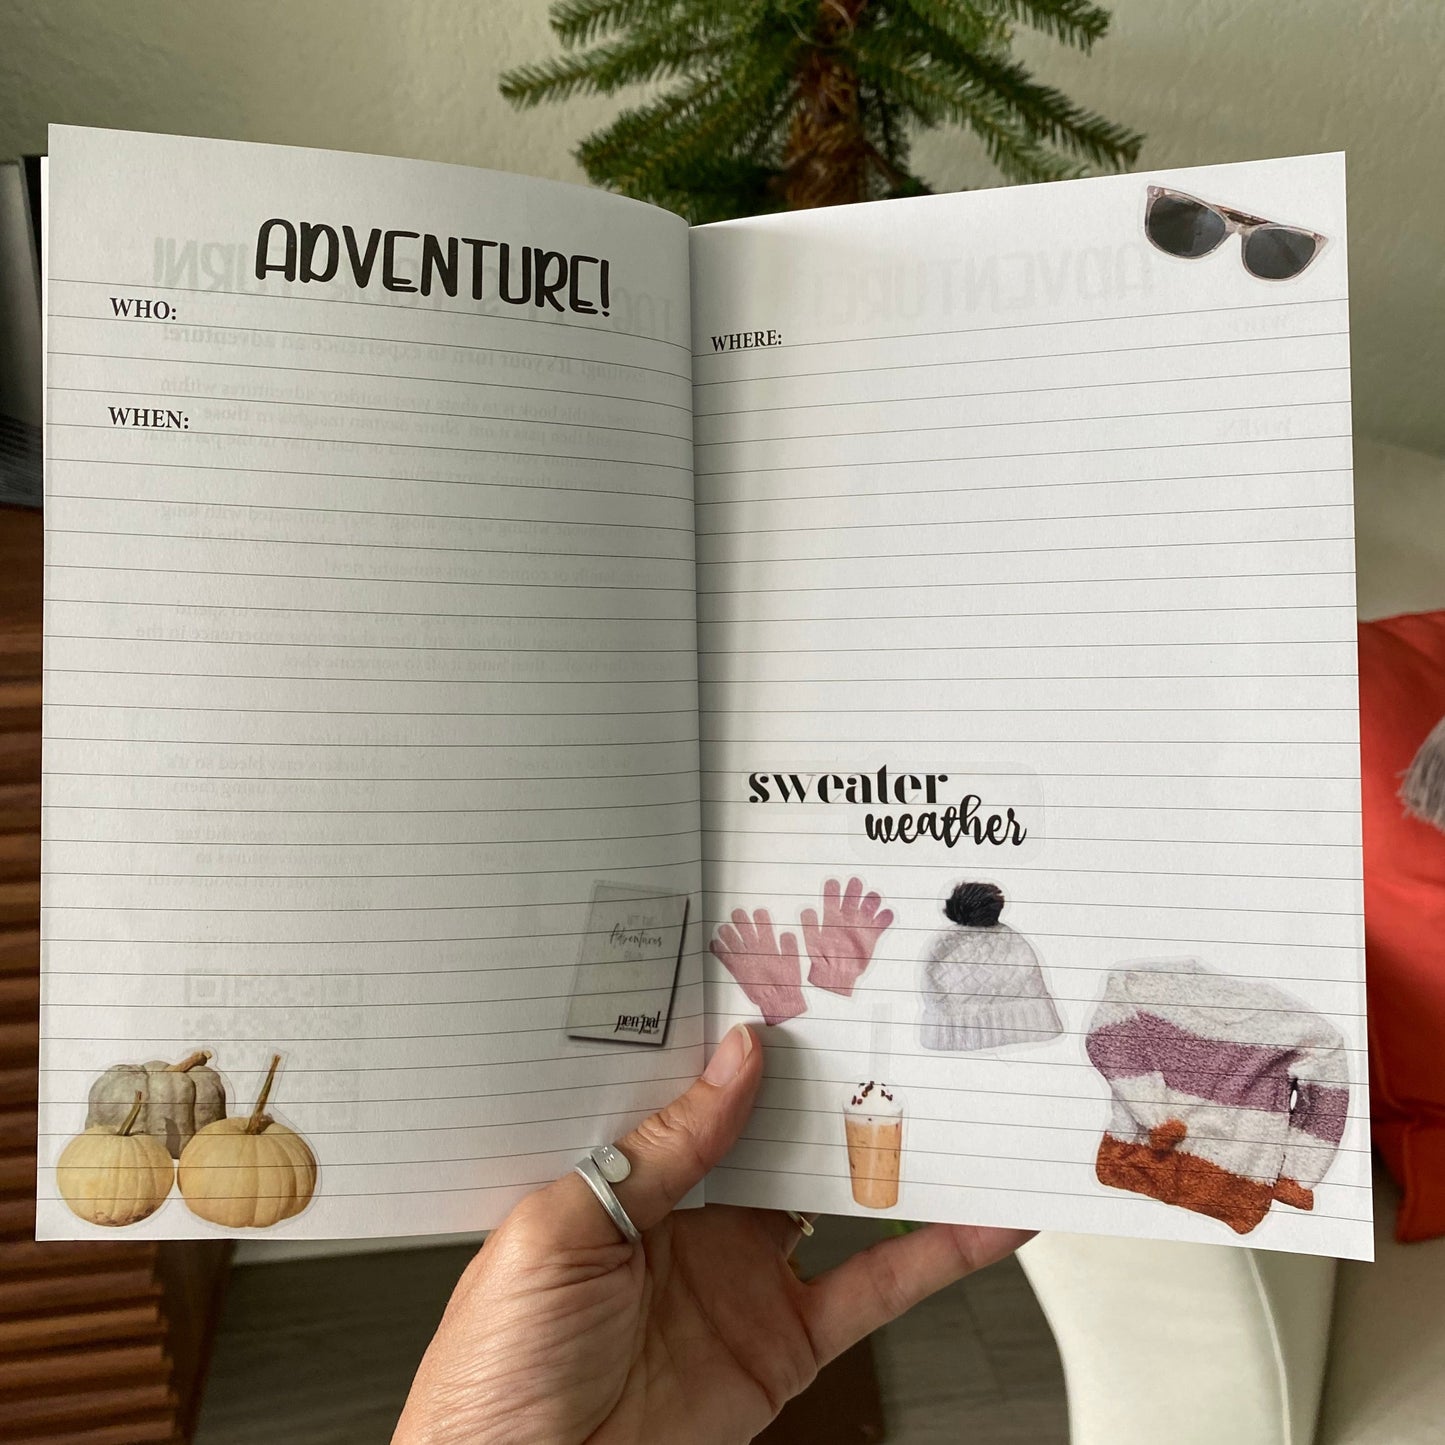 WHOLESALE-Pen Pal Adventure Book with SWEATER WEATHER Stickers - Set of 5 Kits